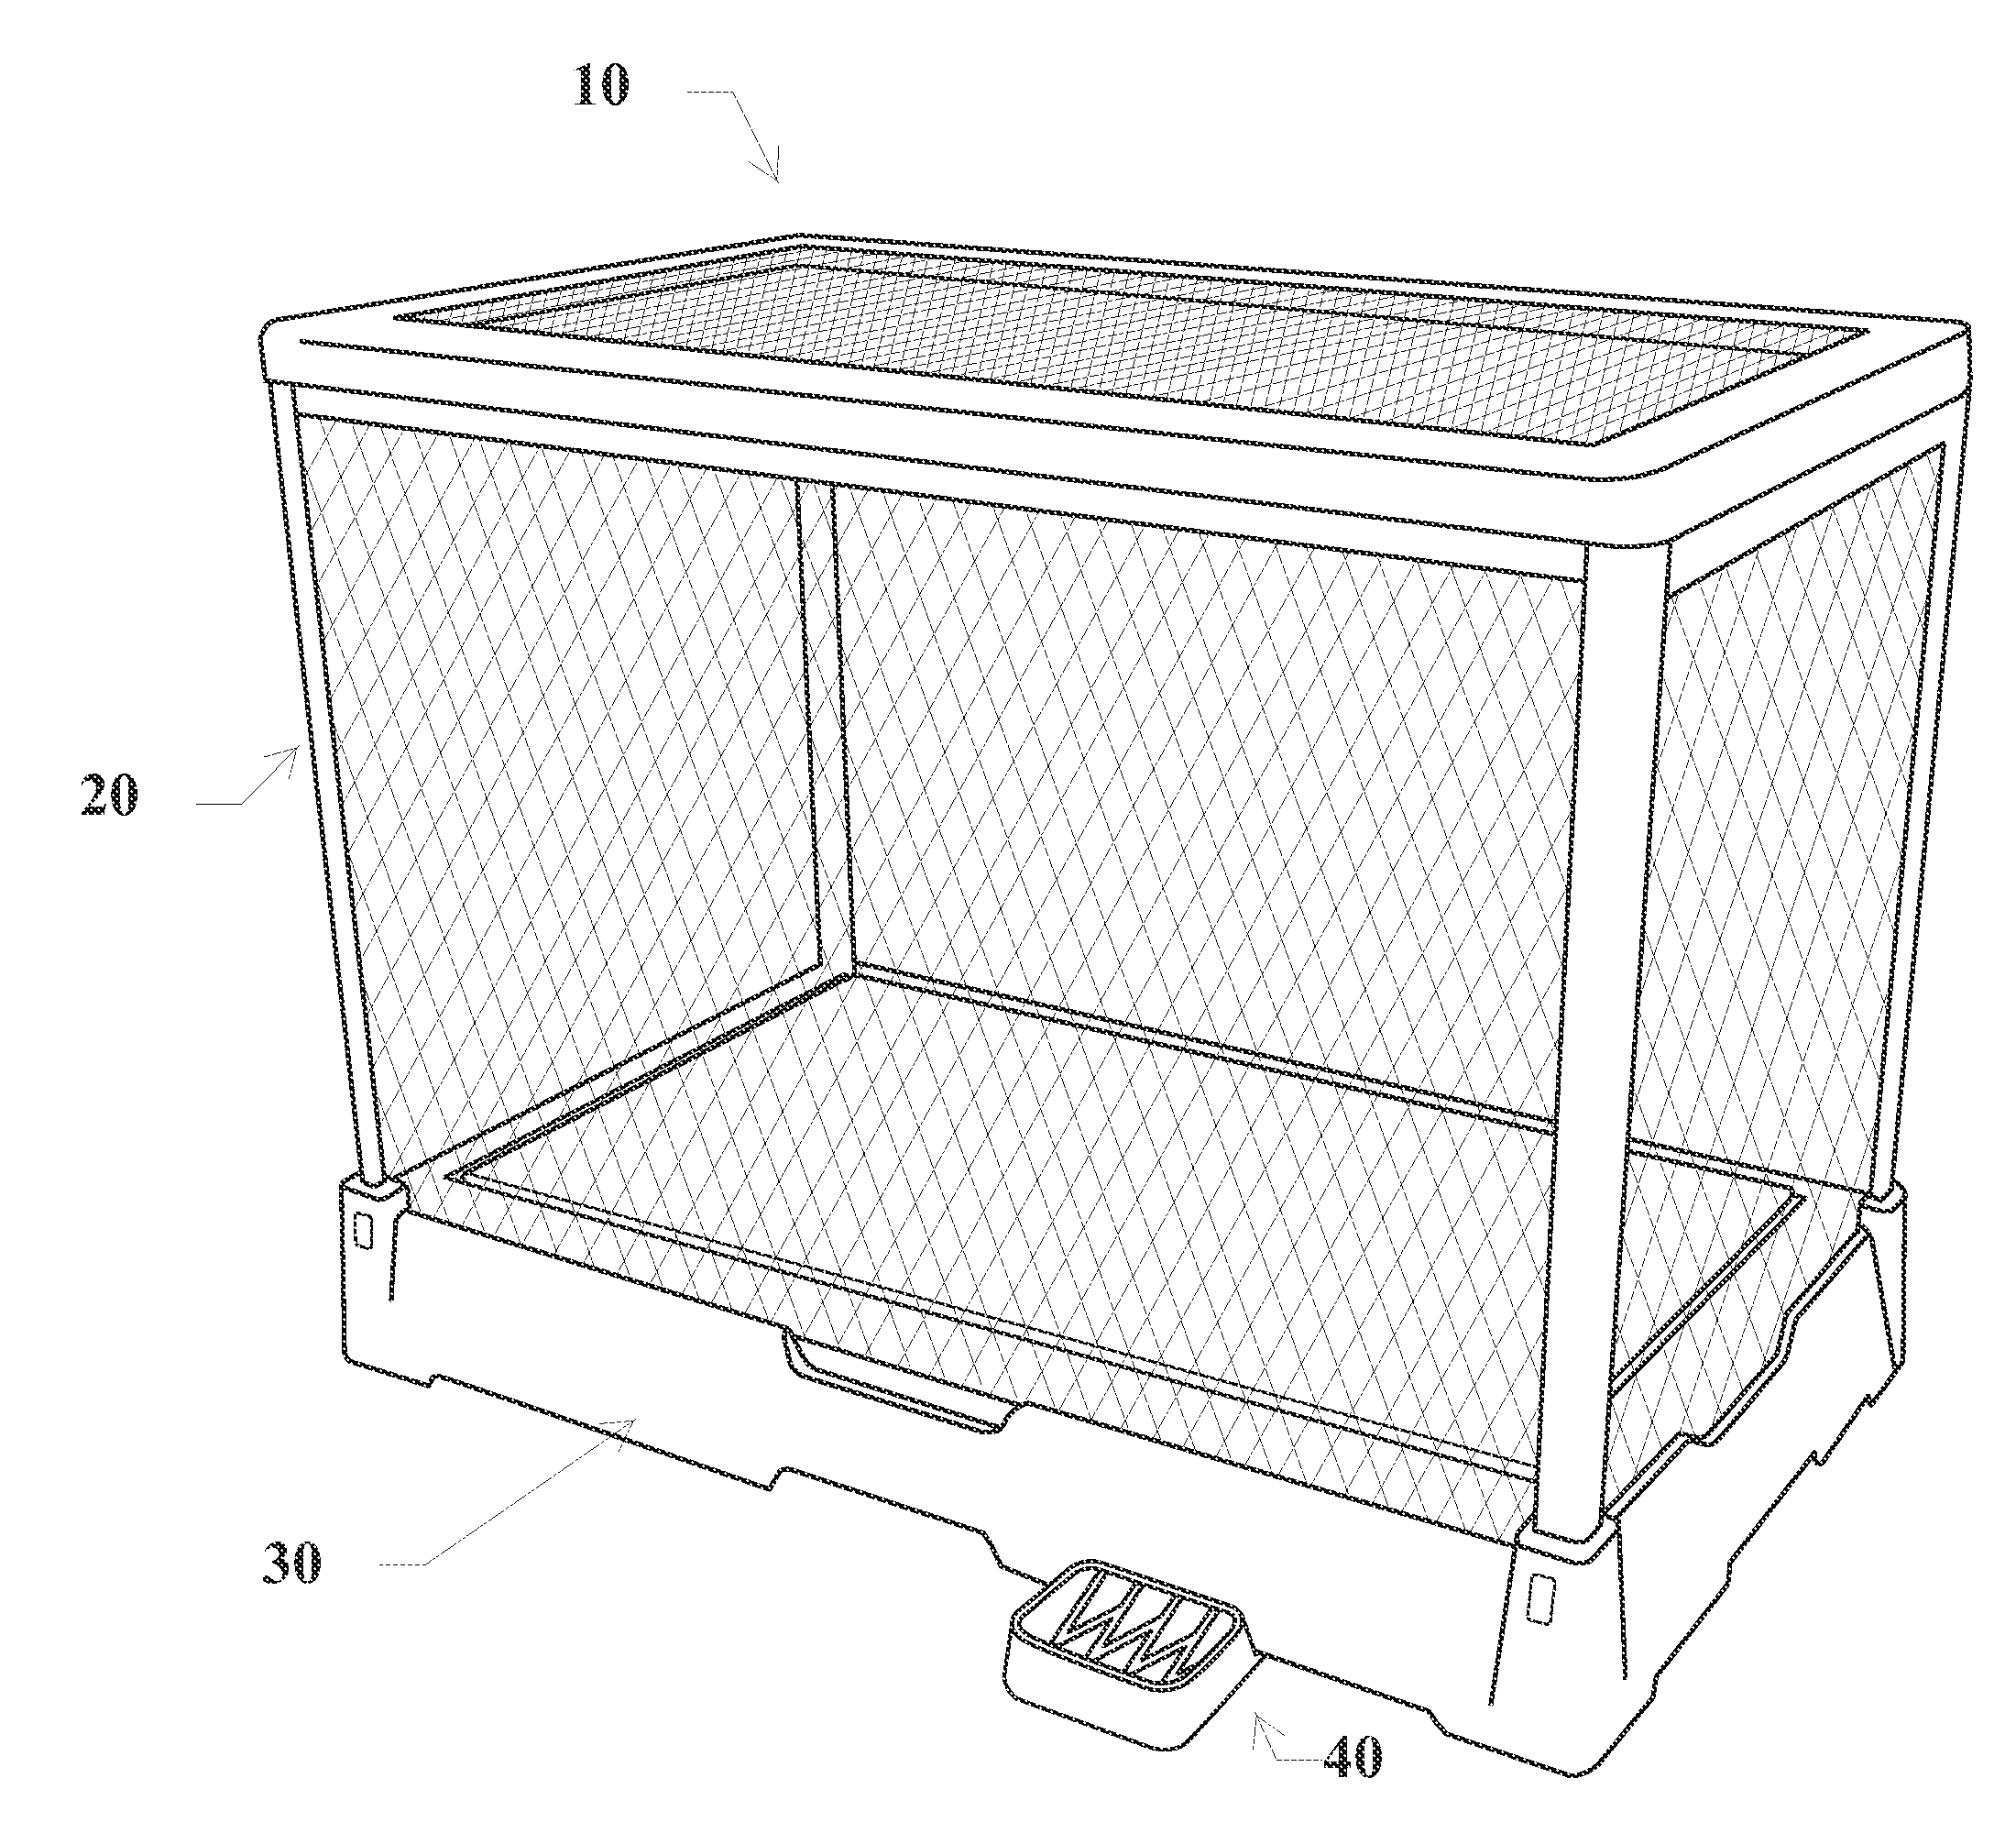 Collapsible combination pet bed and enclosure